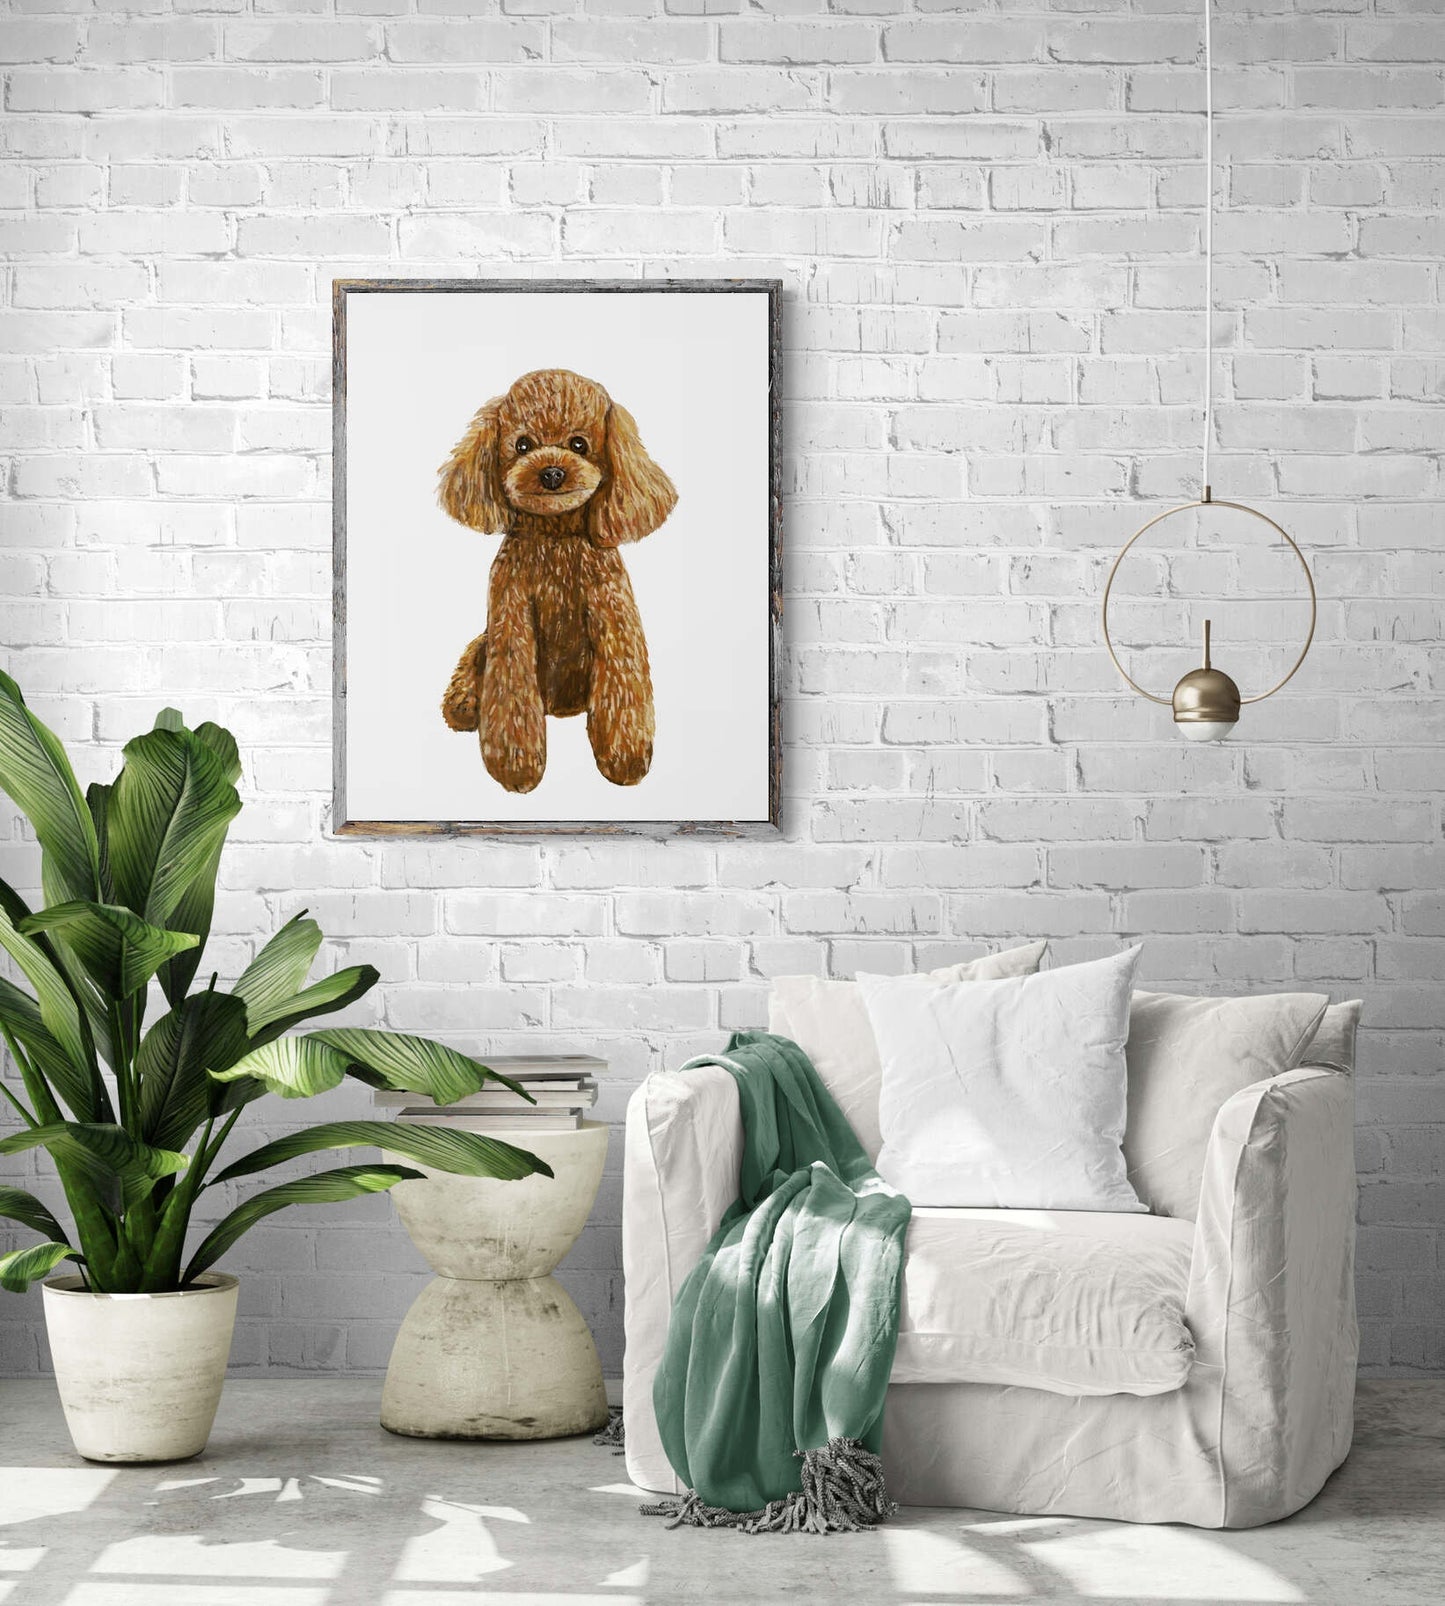 Personalized Brown Poodle Print, Poodle Painting, Doggy Artwork,Cute Poodle Print, Living Room Wall Art, Bedroom Art Print, Nursery Decor